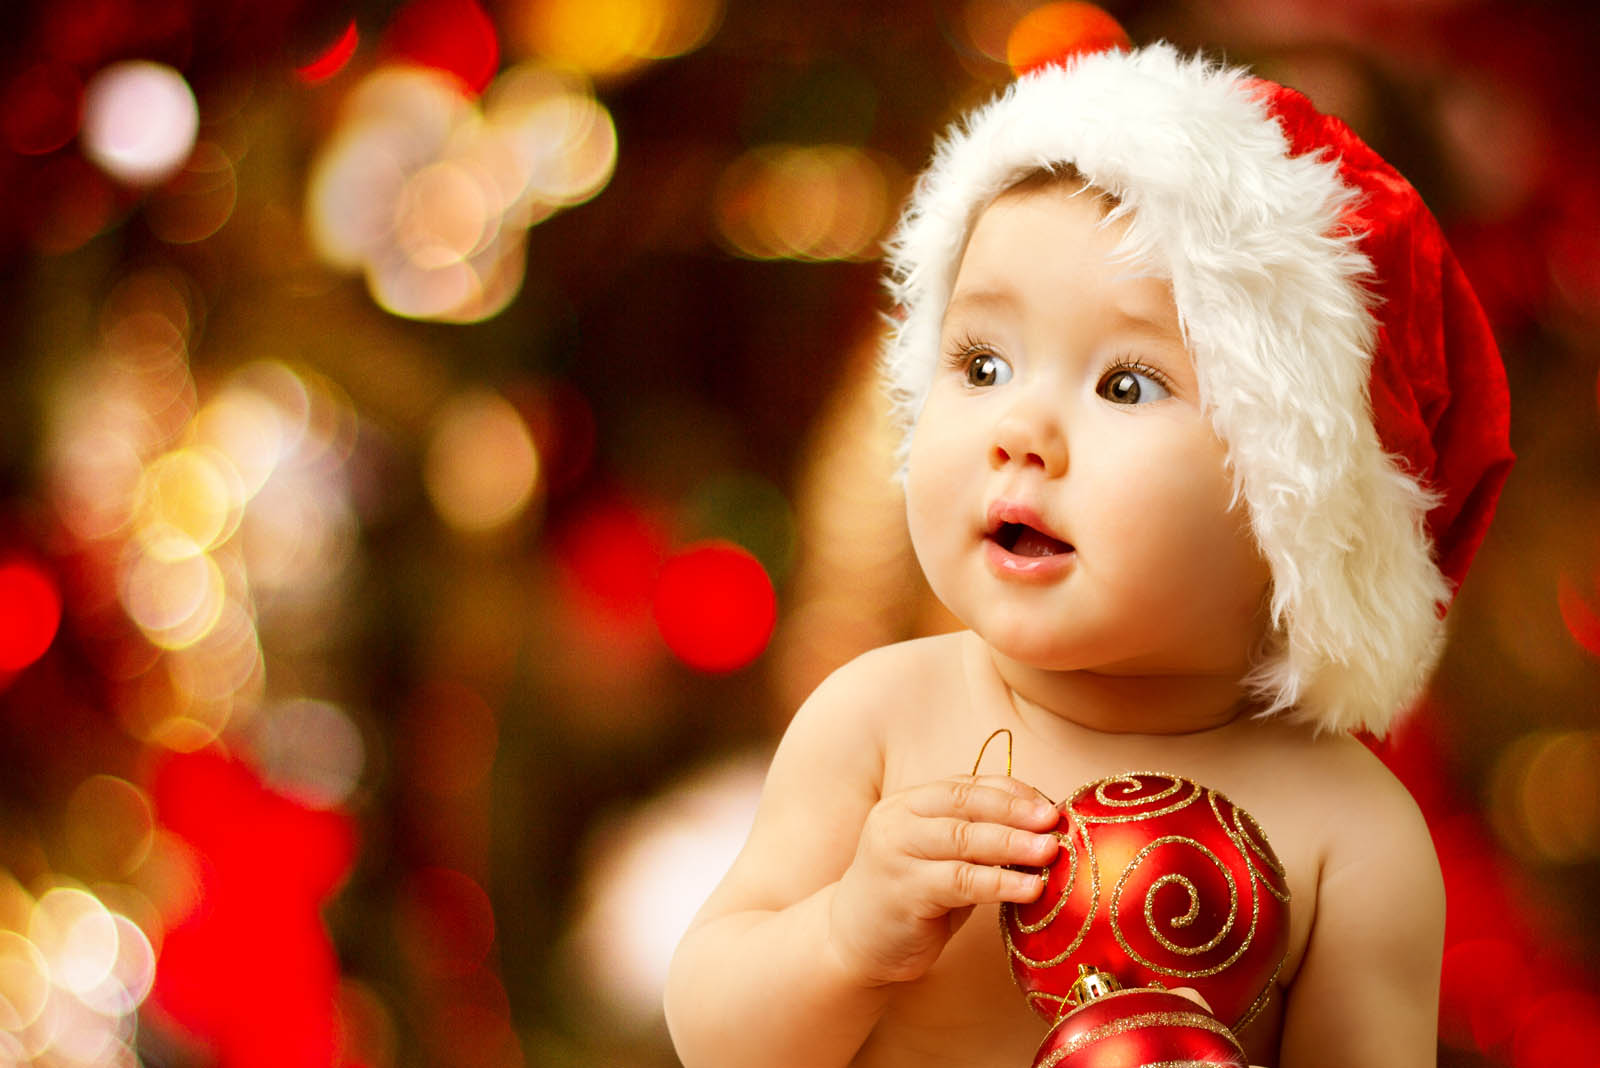 first christmas ideas for baby girl